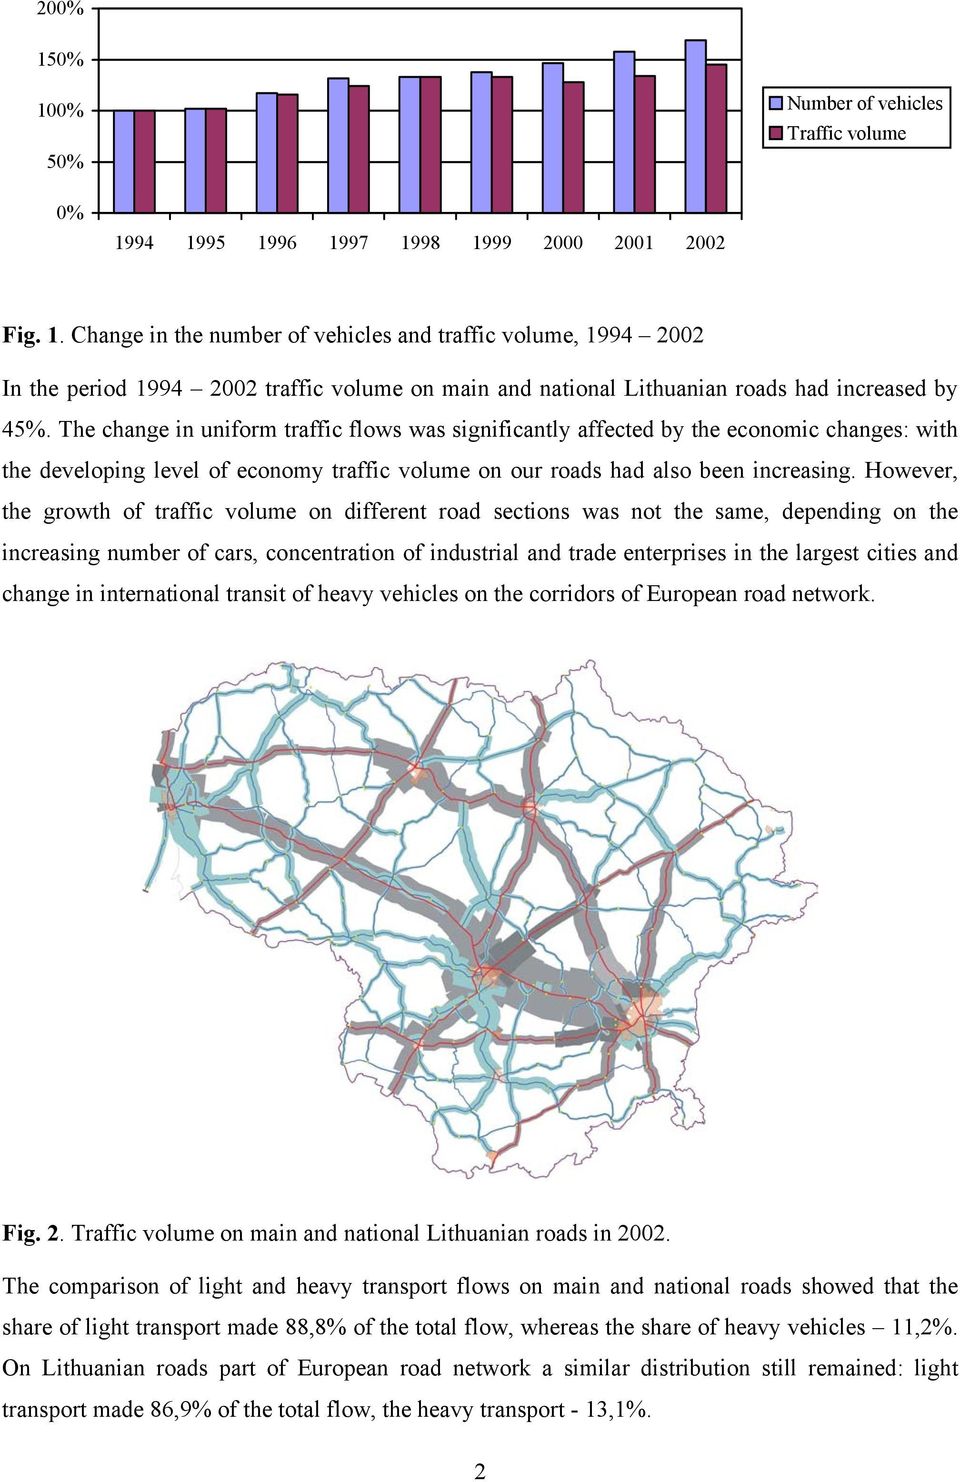 However, the growth of traffic volume on different road sections was not the same, depending on the increasing number of cars, concentration of industrial and trade enterprises in the largest cities